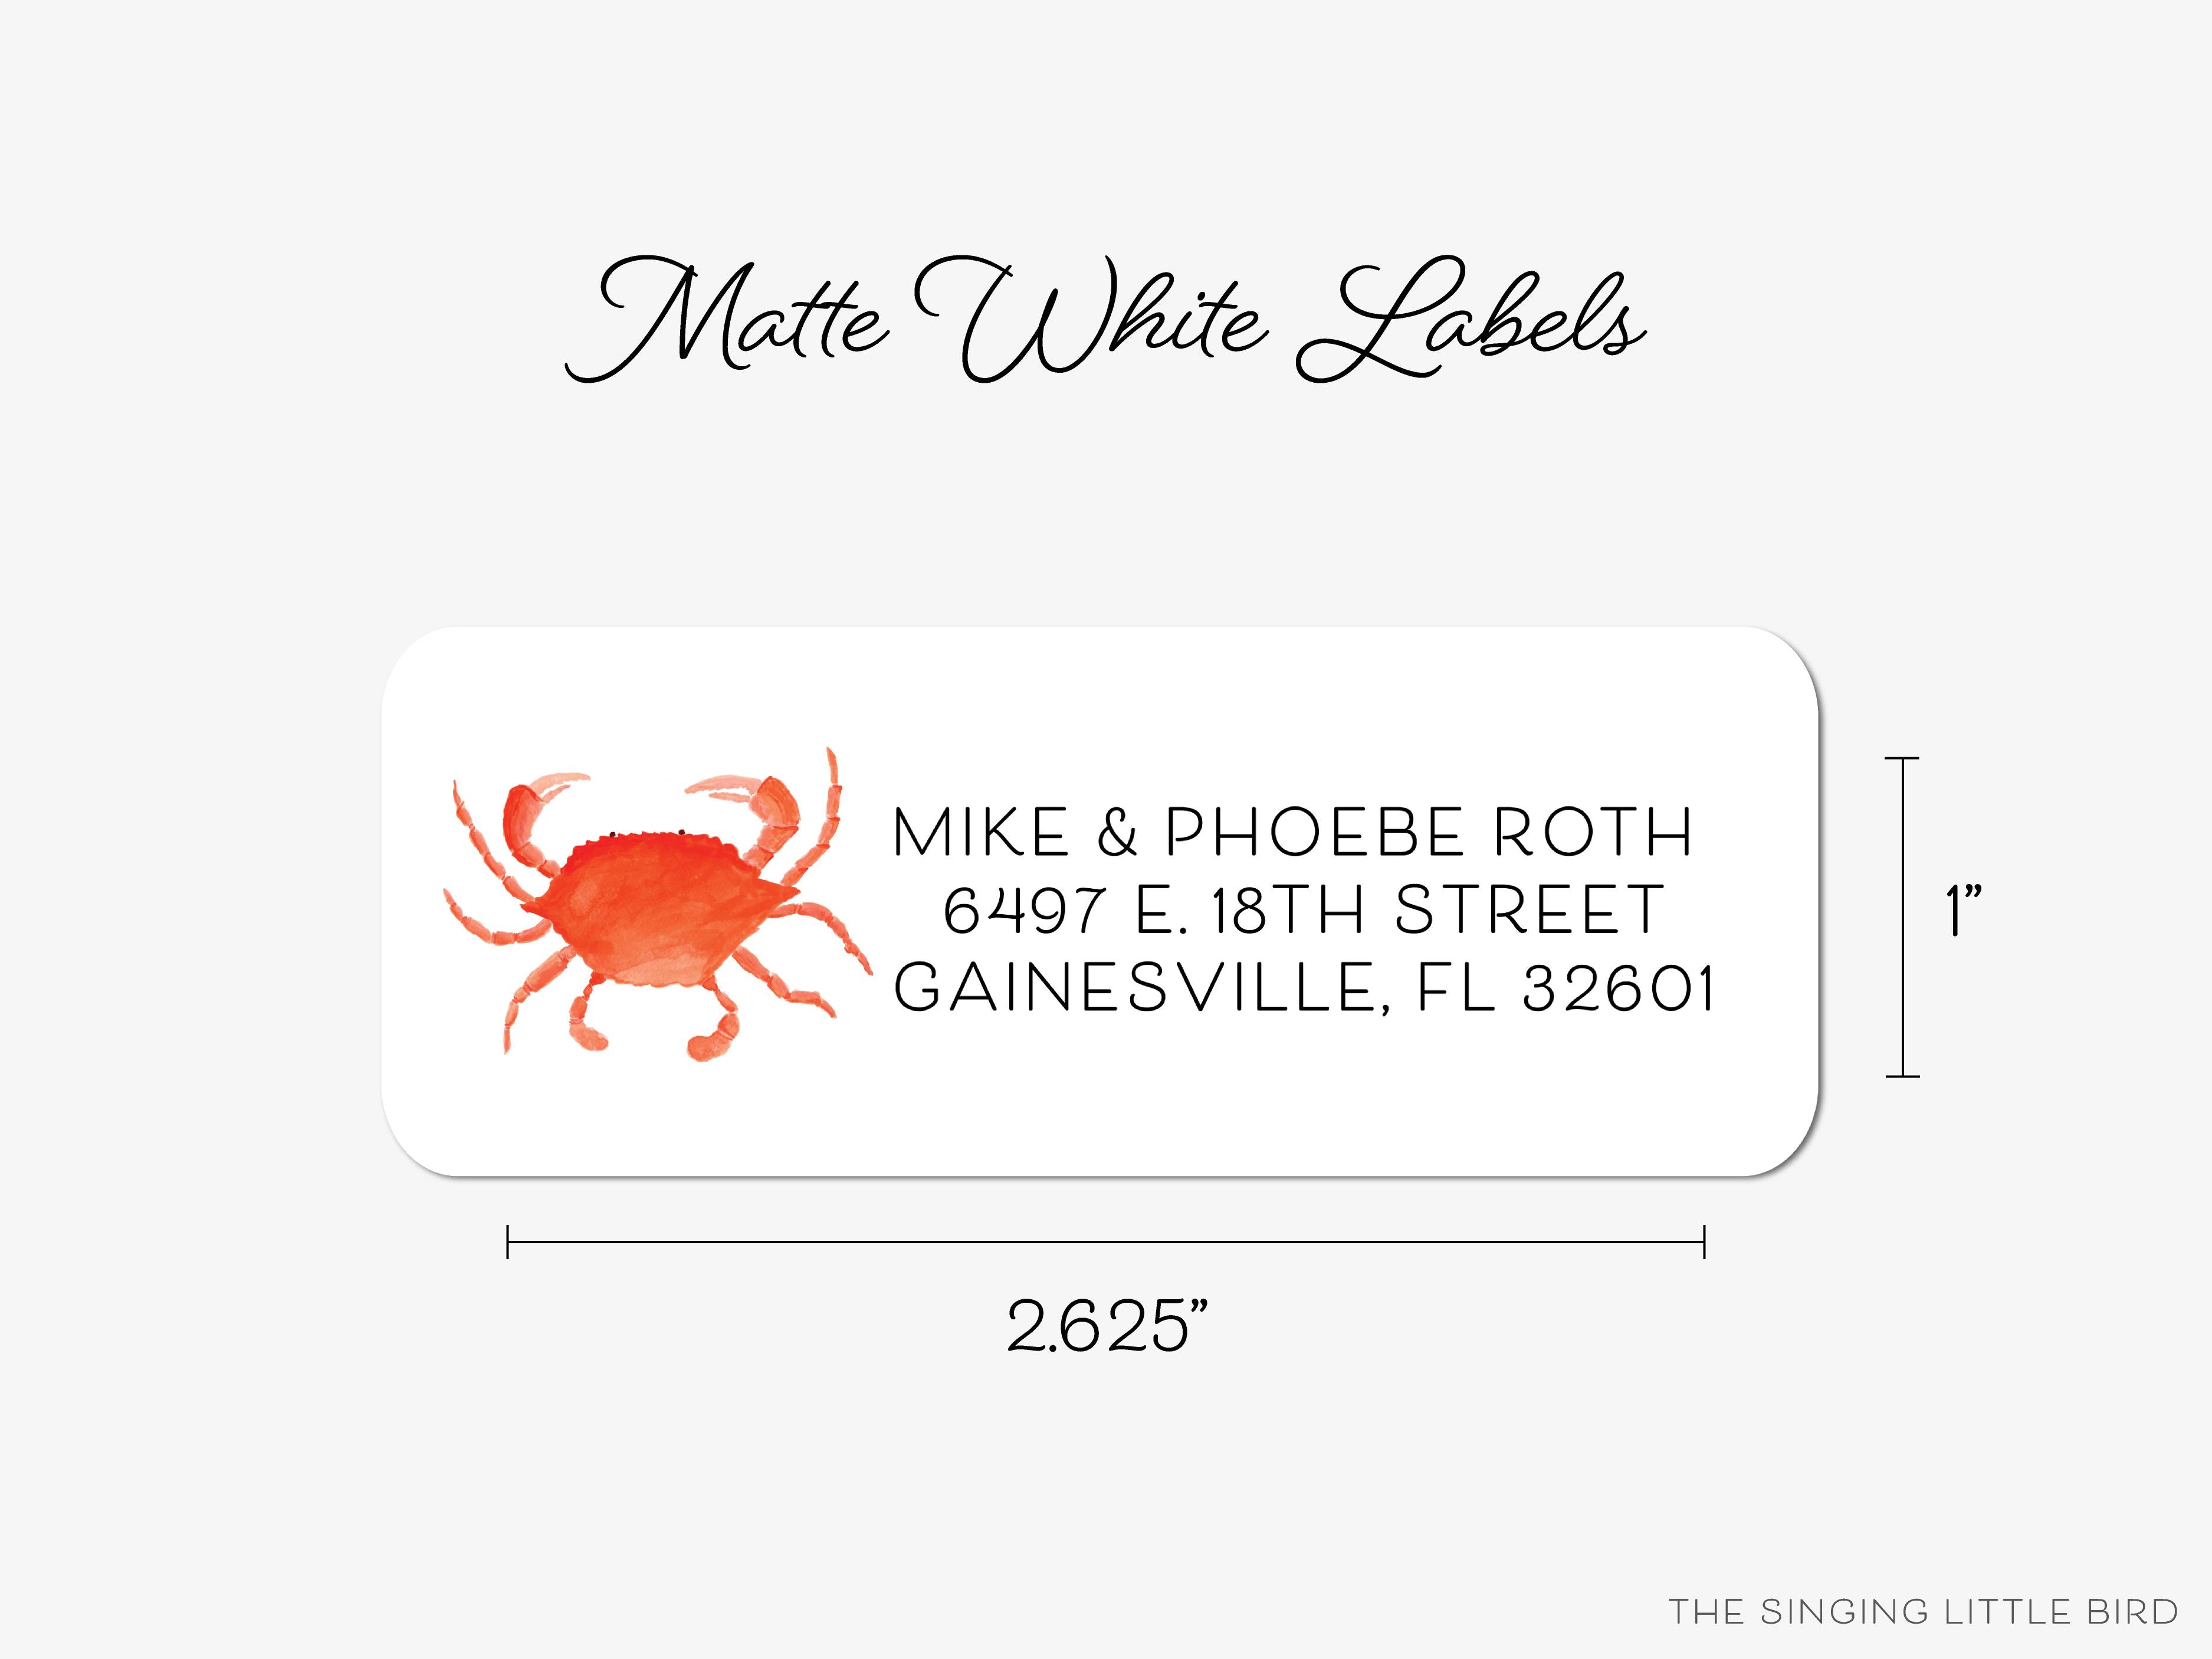 Red Crab Return Address Labels-These personalized return address labels are 2.625" x 1" and feature our hand-painted watercolor Red Crab, printed in the USA on beautiful matte finish labels. These make great gifts for yourself or the beach lover.-The Singing Little Bird